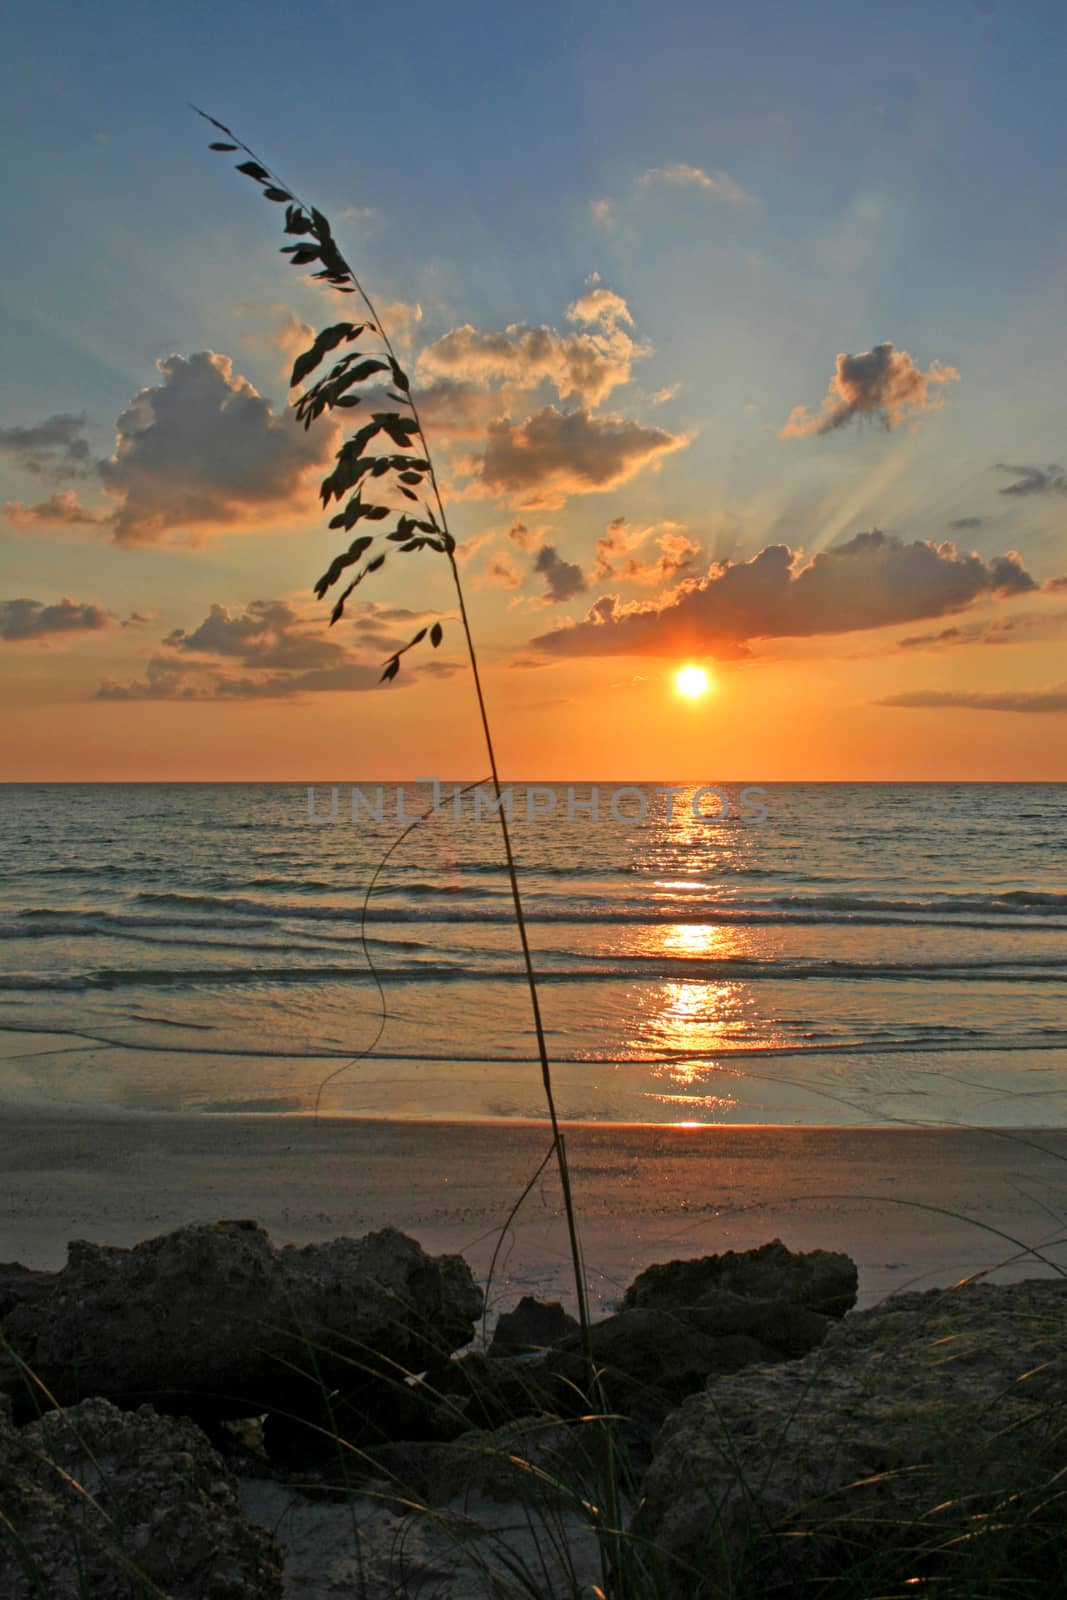 A sunset over the ocean with a reed